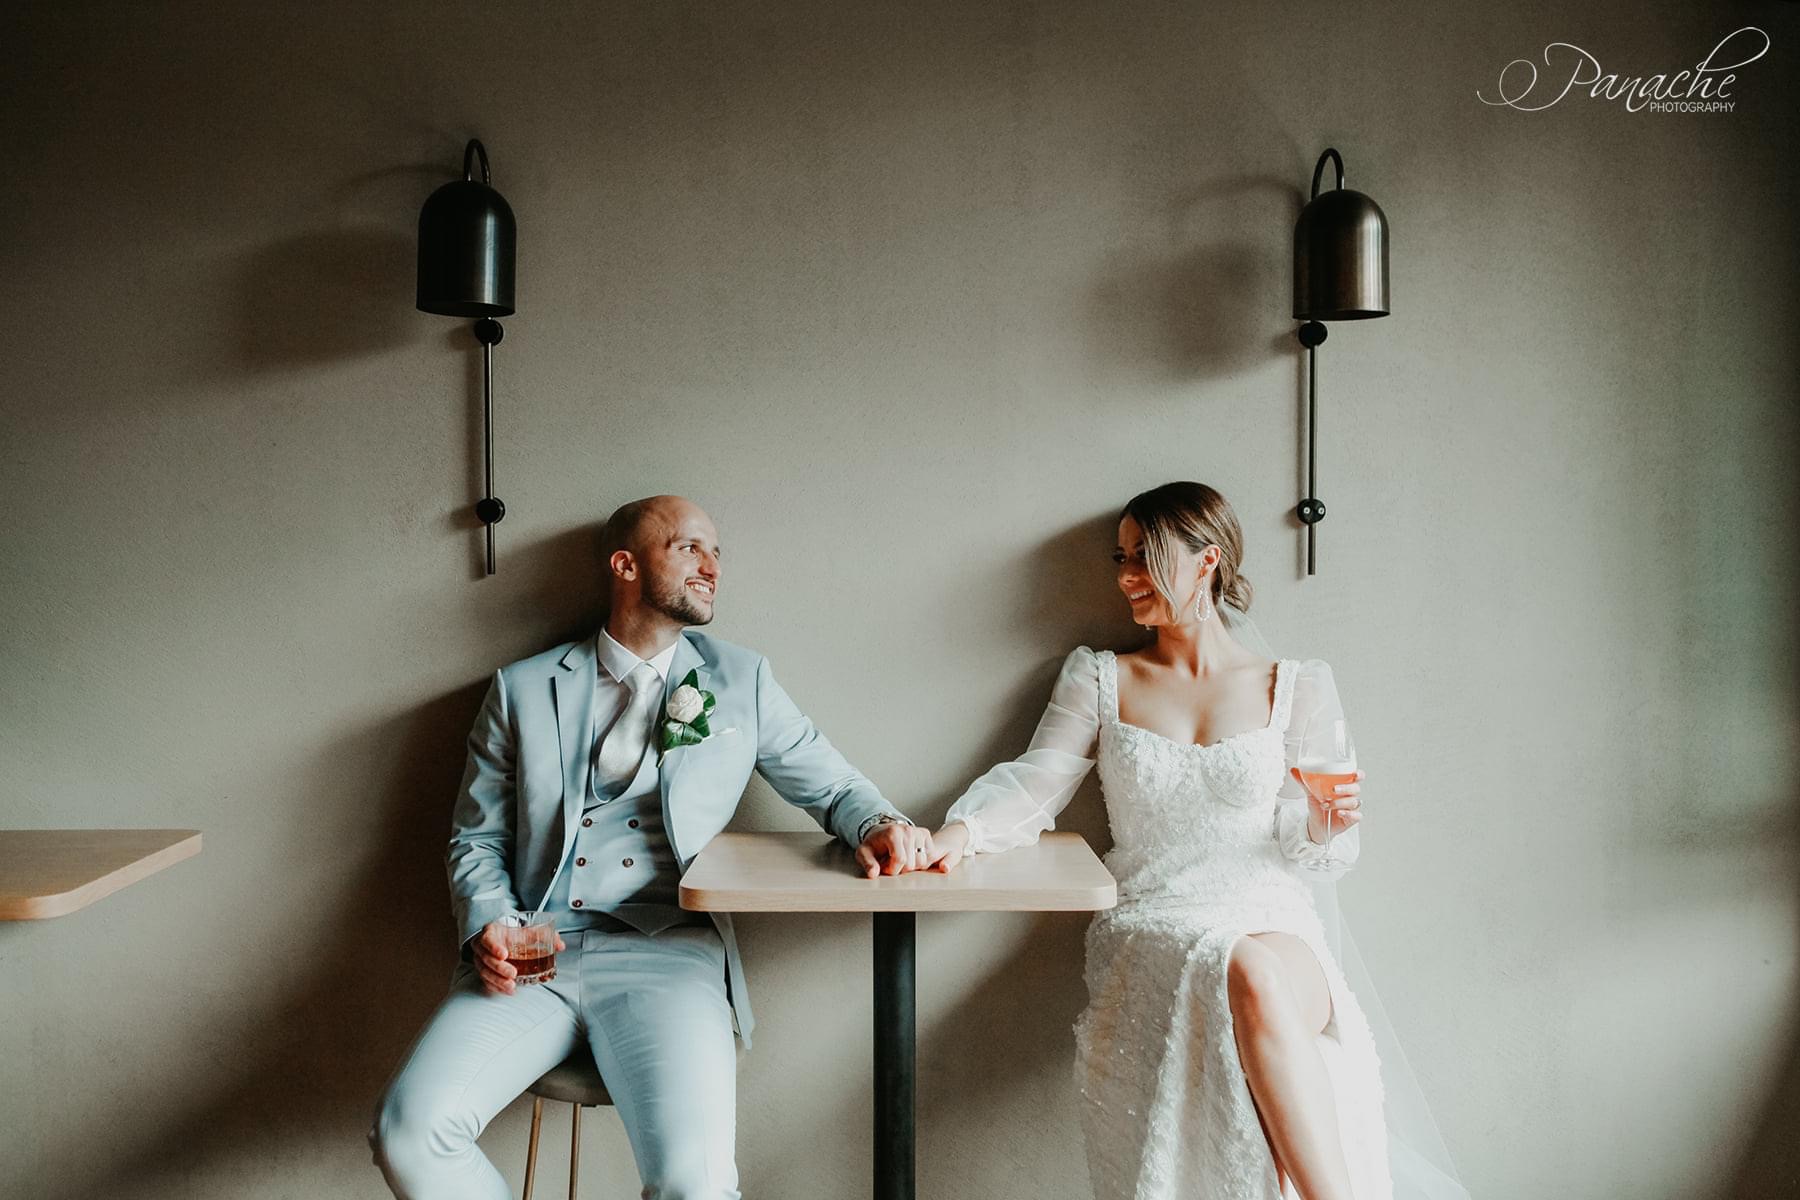 Newlyweds Cristiana and Jake sitting in a modern bar with a concrete wall backdrop, the couple are sitting at a high table with their backs against the wall holding hands across the table. Cristiana is also holding a cocktail in her other hand.